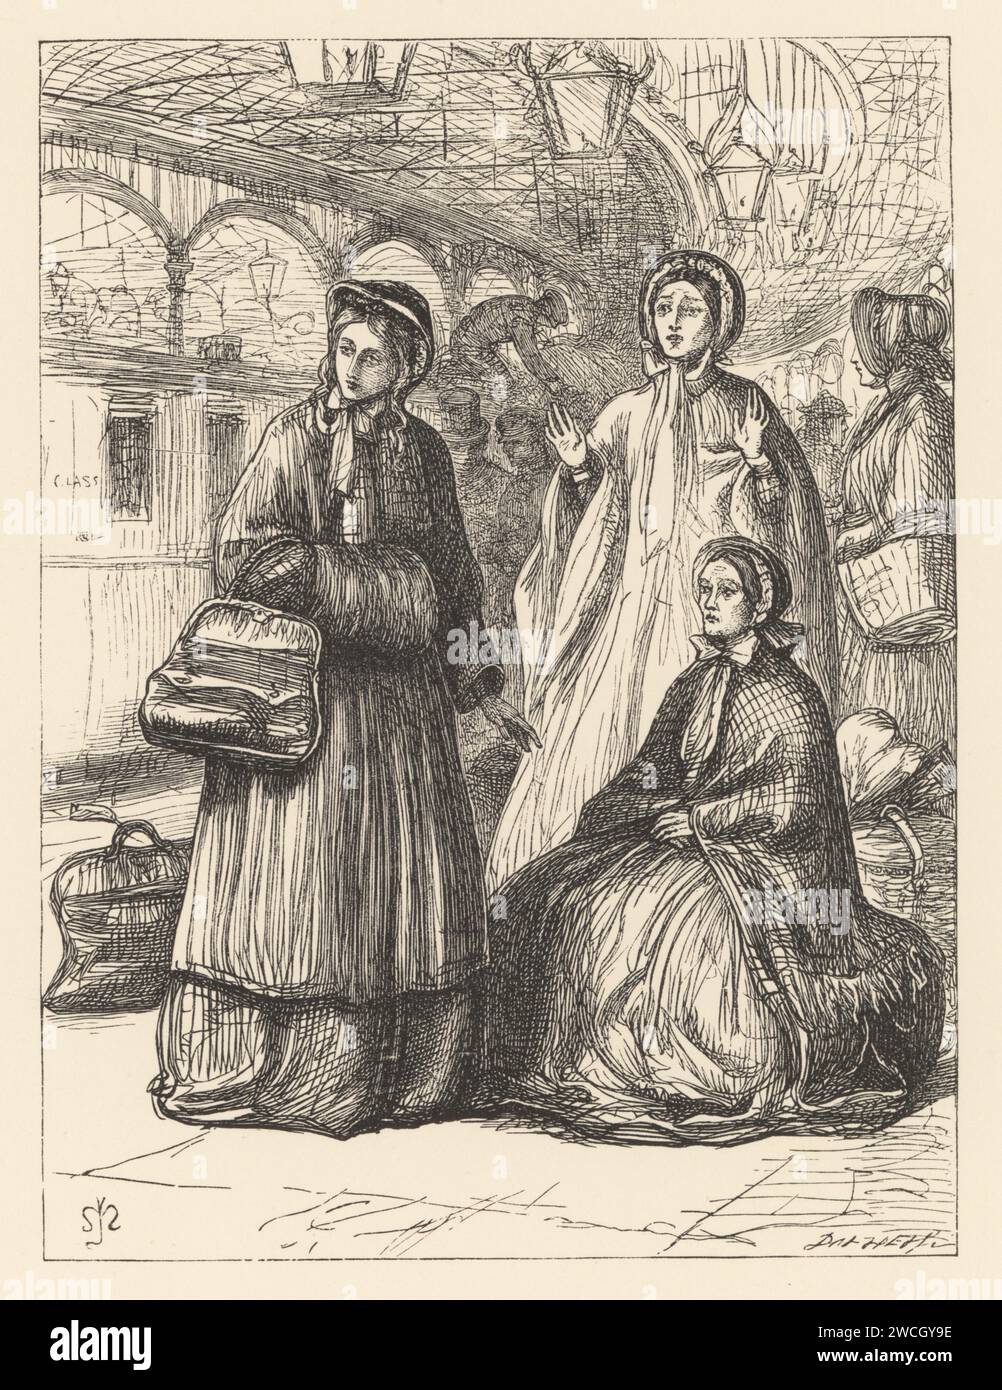 Three  ladies with luggage waiting on a platform in a large Victorian train station. Waiting in the Railway Station, from Good Words. Woodcut by the Dalziel brothers after an illustration by Pre-Raphaelite artist John Everett Millais from Millais’ Illustrations, a Collection of Drawings on Wood, Alexander Strahan, London, 1866. Stock Photo